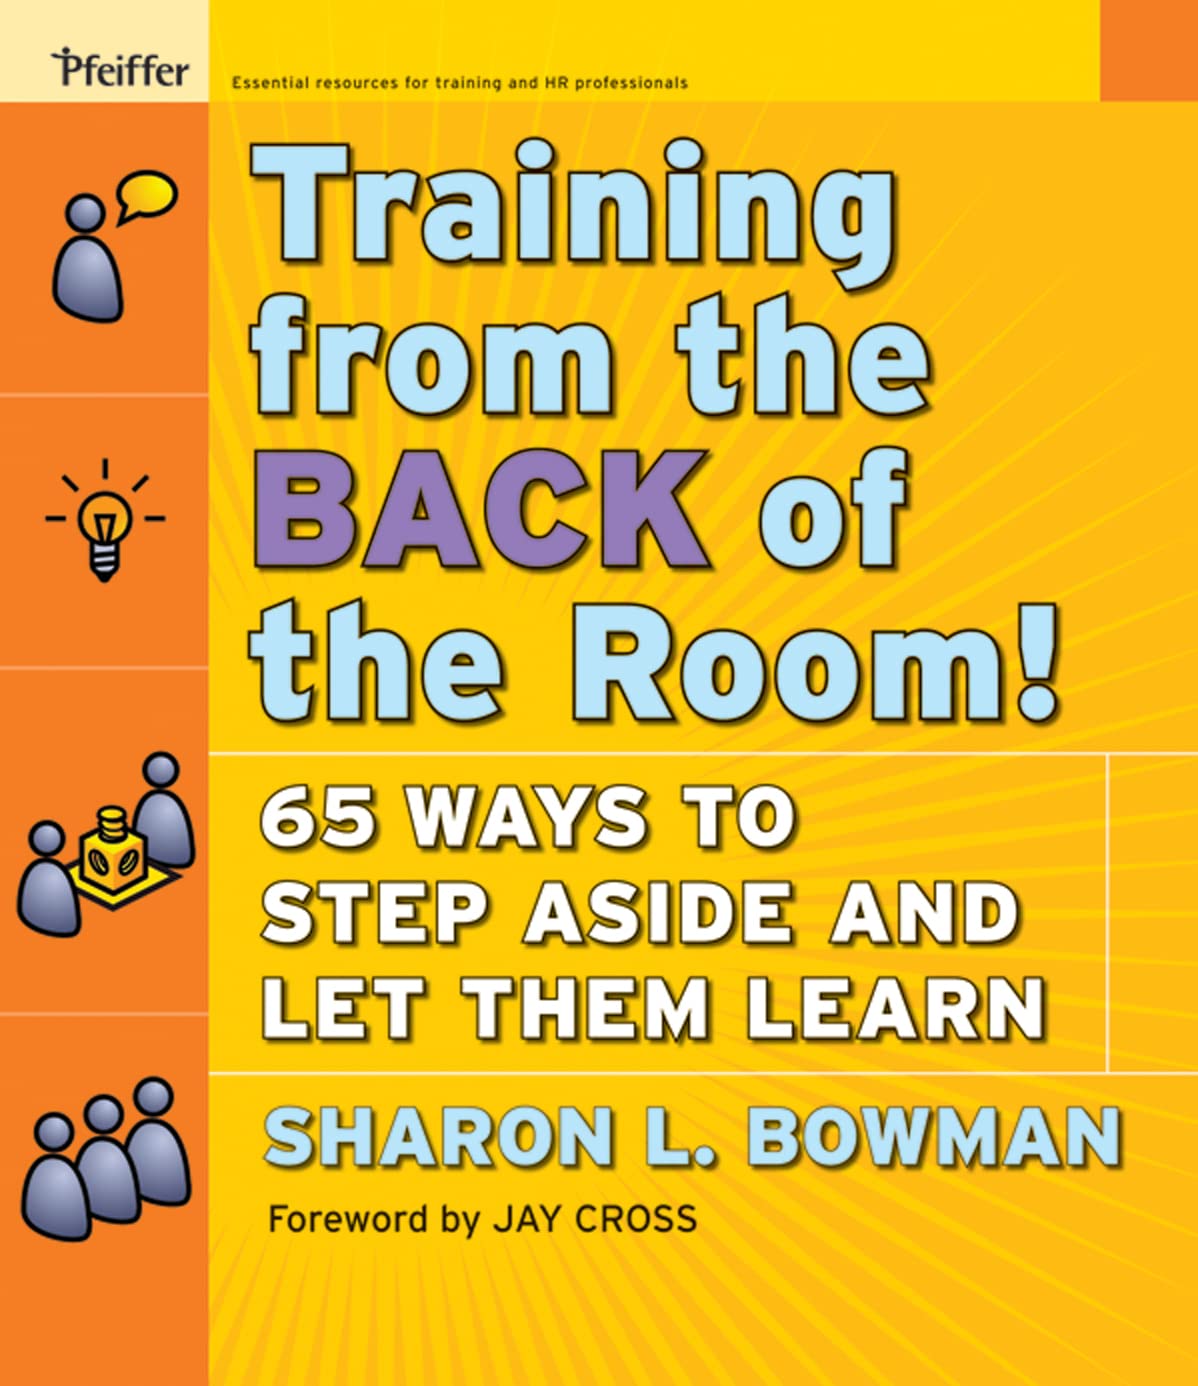 Training from the BACK of the Room. Sharon L. Bowman